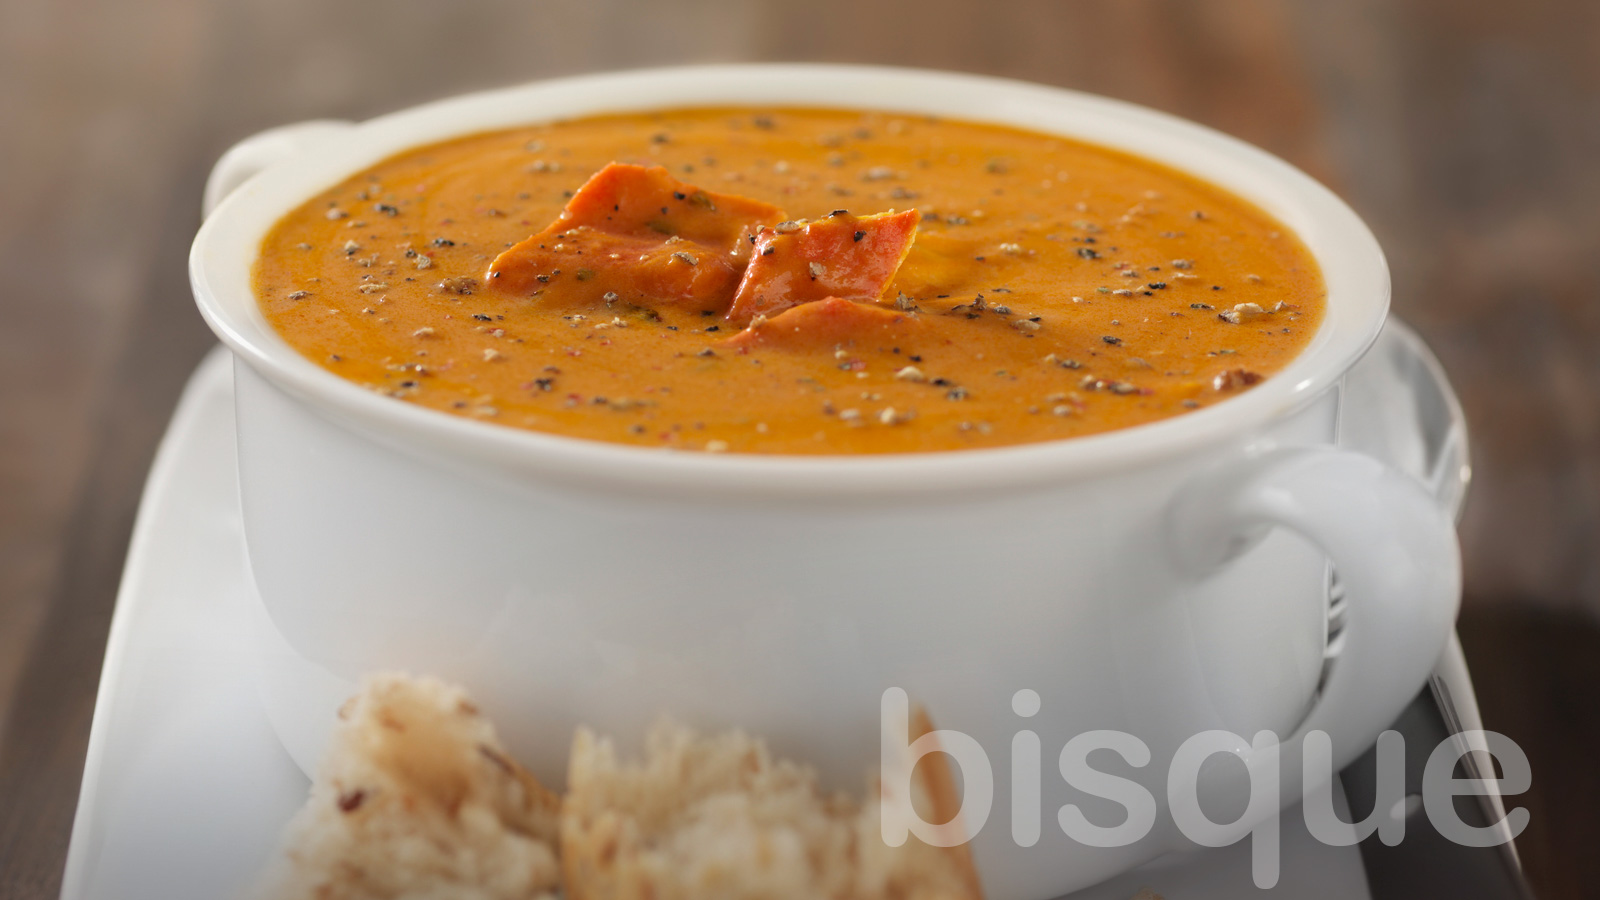 cooking term example of bisque